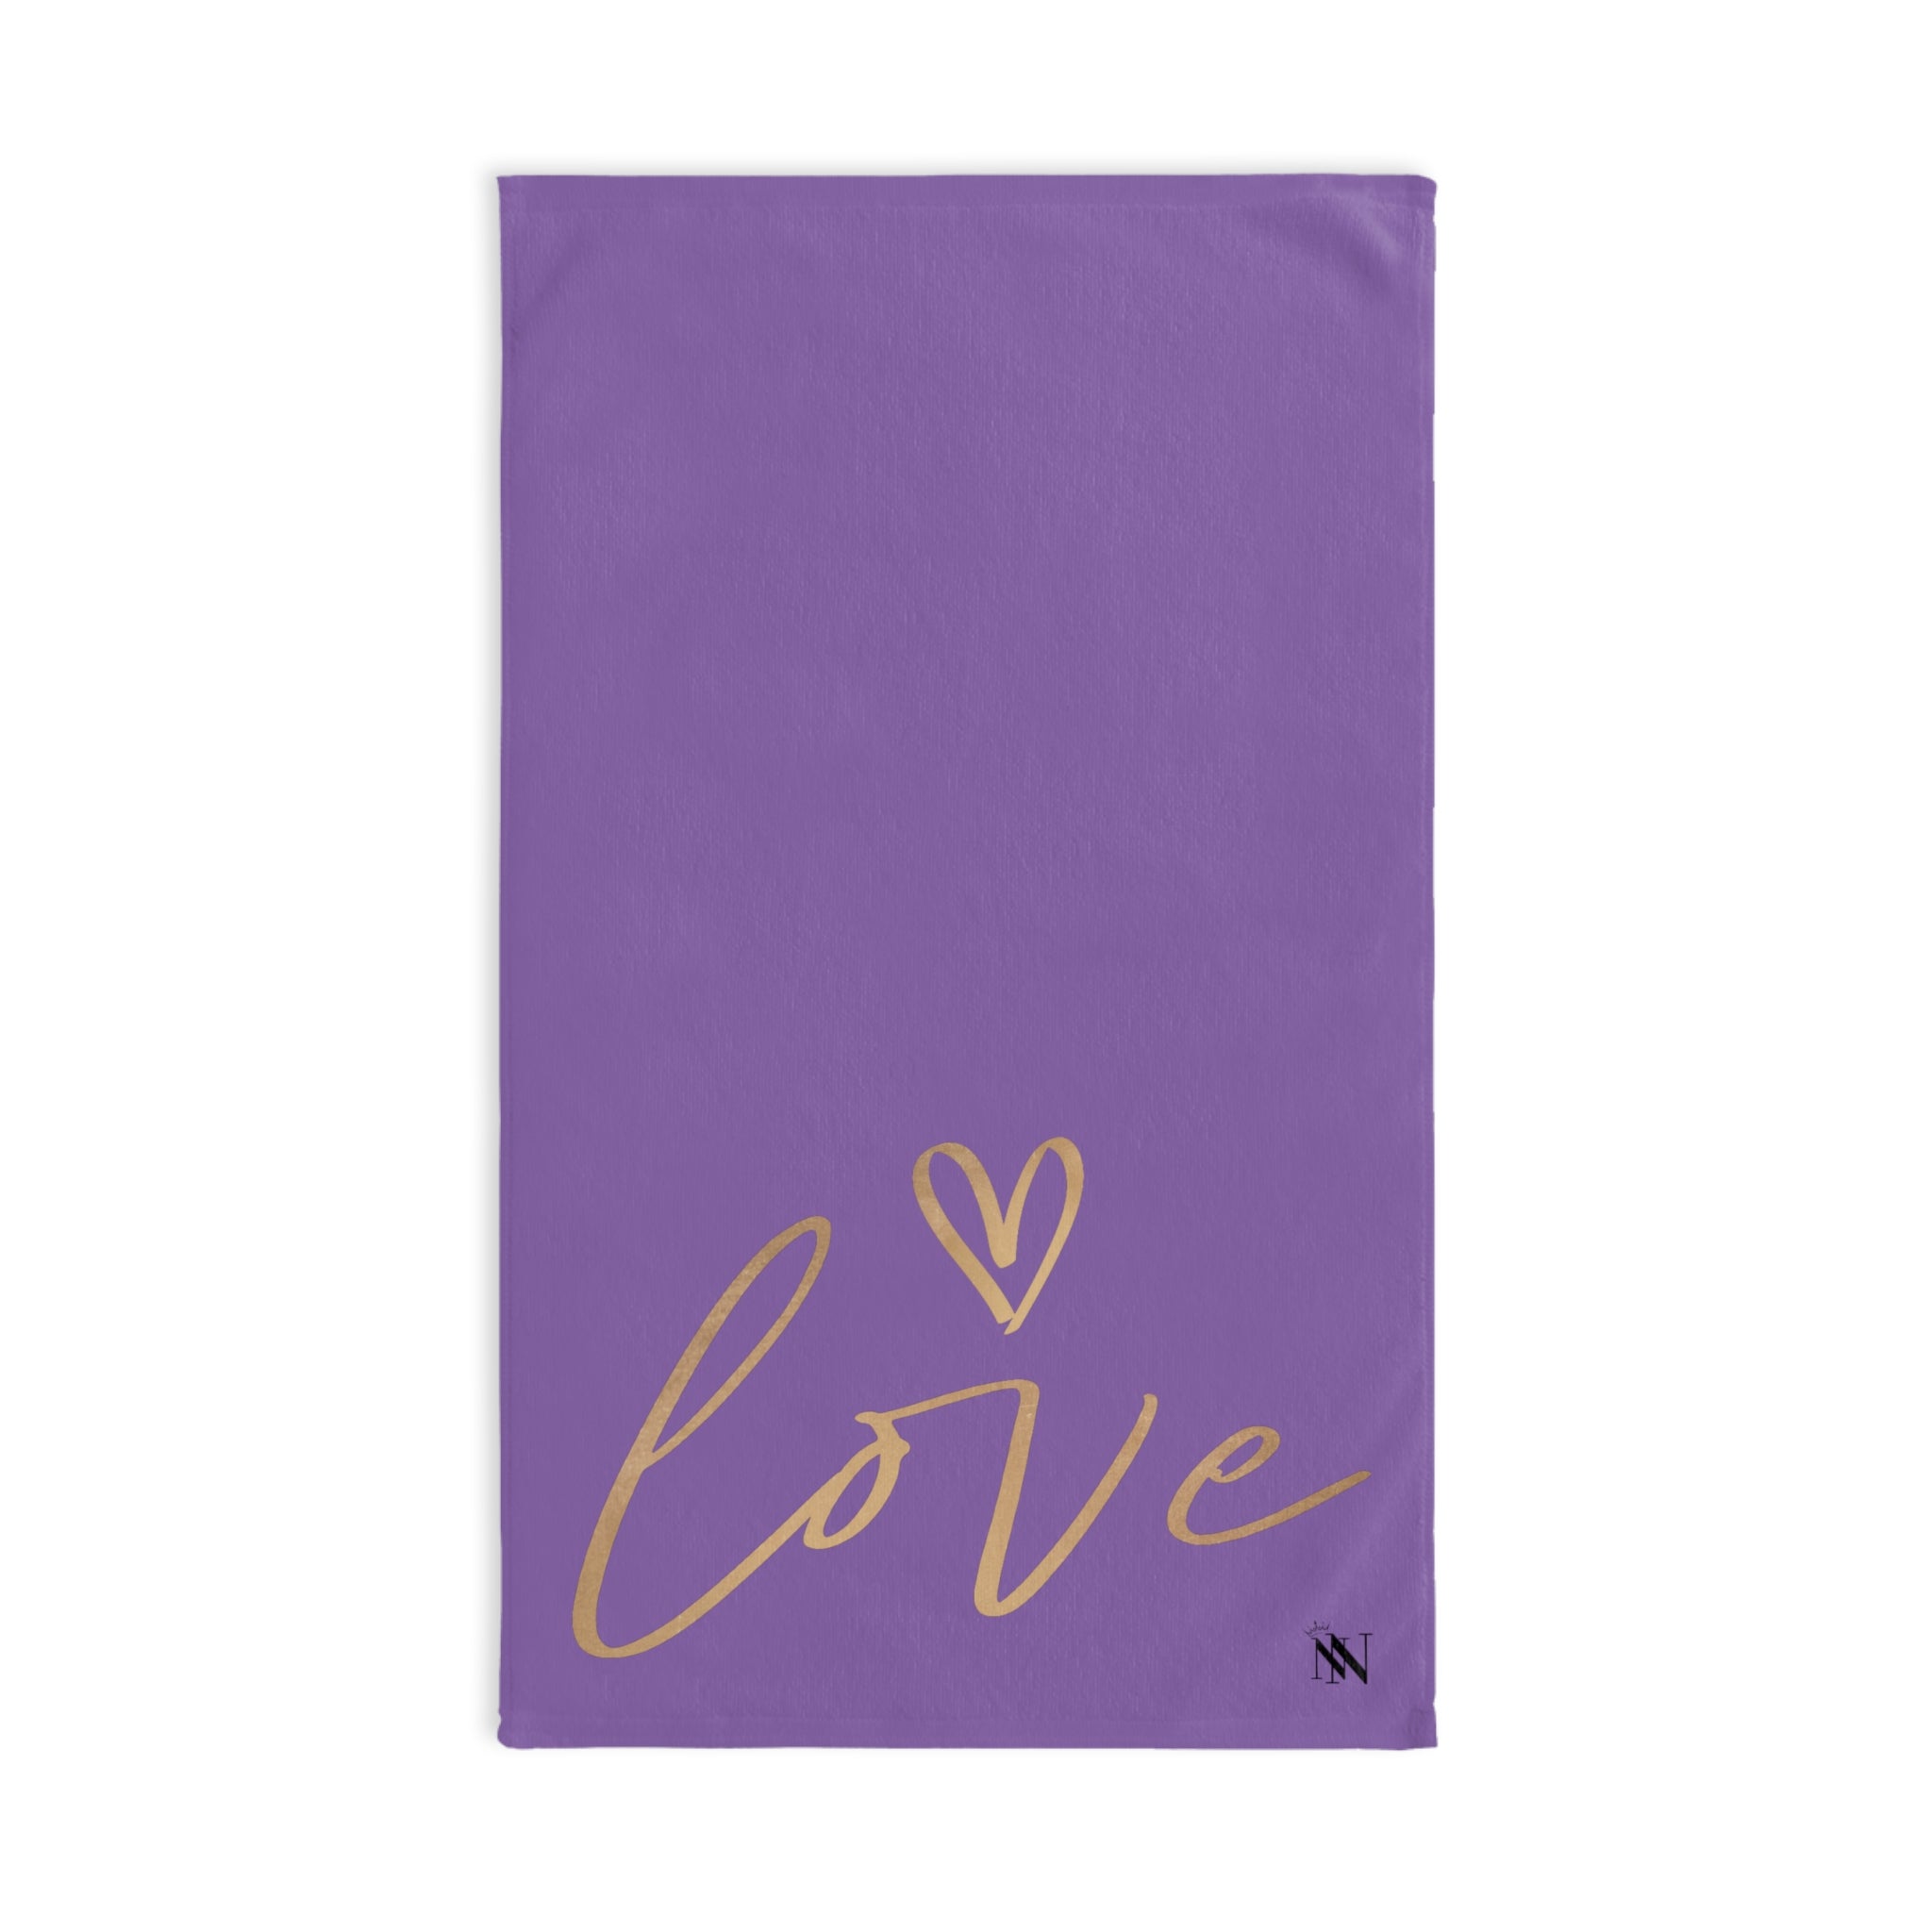 Gold Love Heart Lavendar | Funny Gifts for Men - Gifts for Him - Birthday Gifts for Men, Him, Husband, Boyfriend, New Couple Gifts, Fathers & Valentines Day Gifts, Hand Towels NECTAR NAPKINS